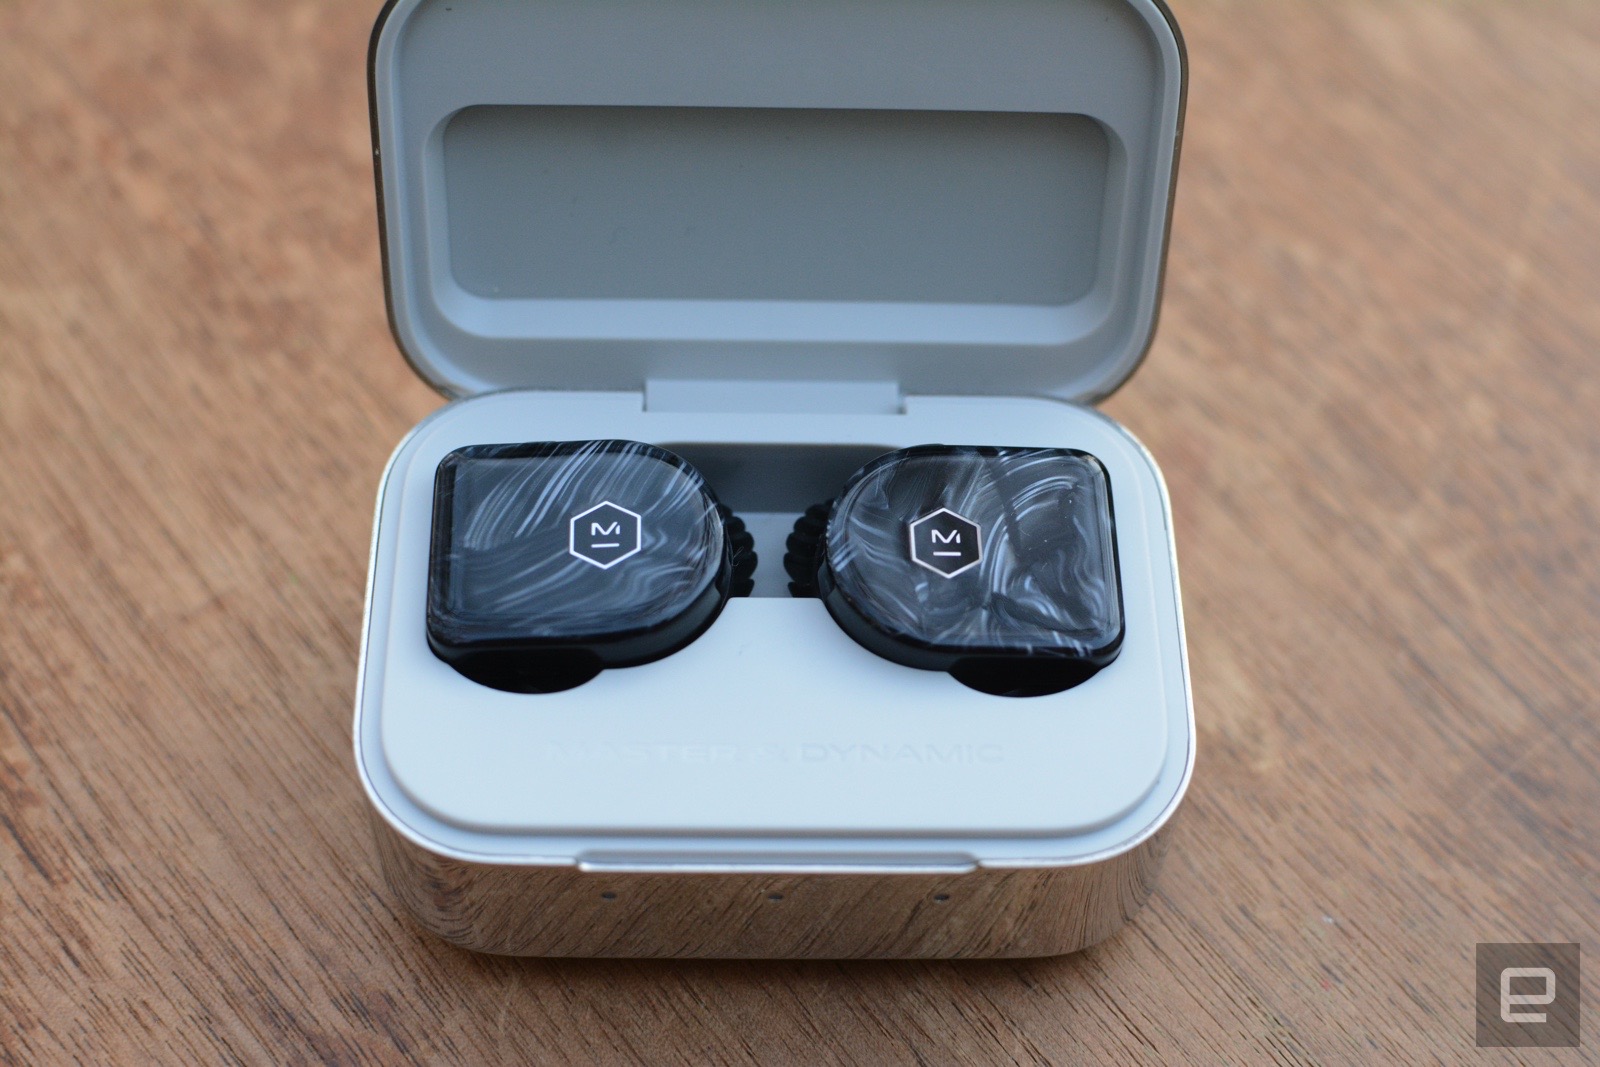 For version 2.0, the company fixed the biggest issues with its true wireless earbuds.